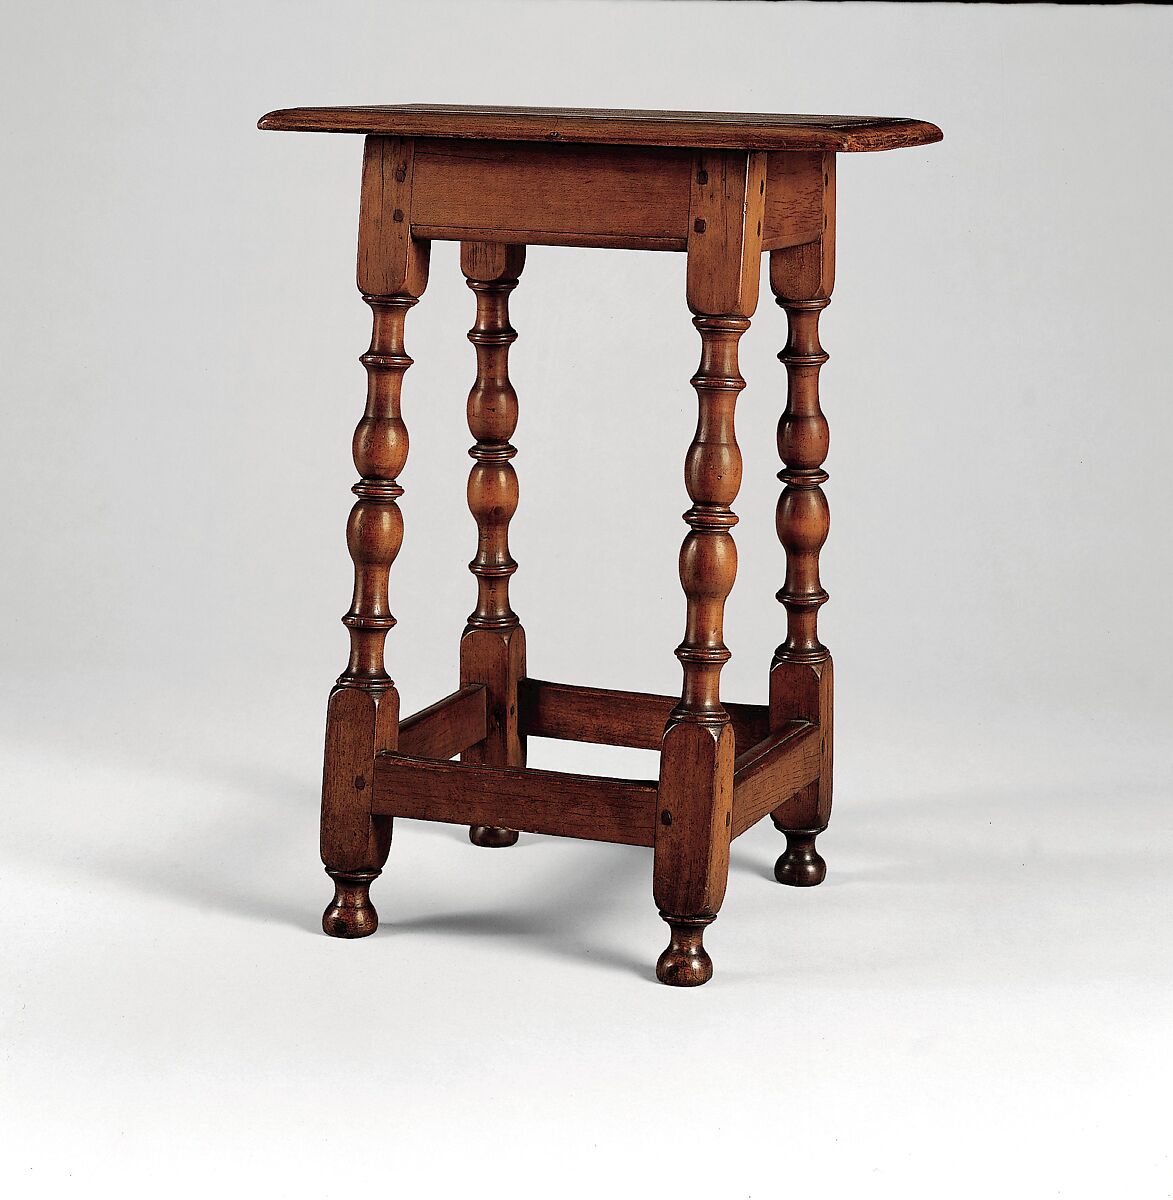 Joint Stool, Maple, American 